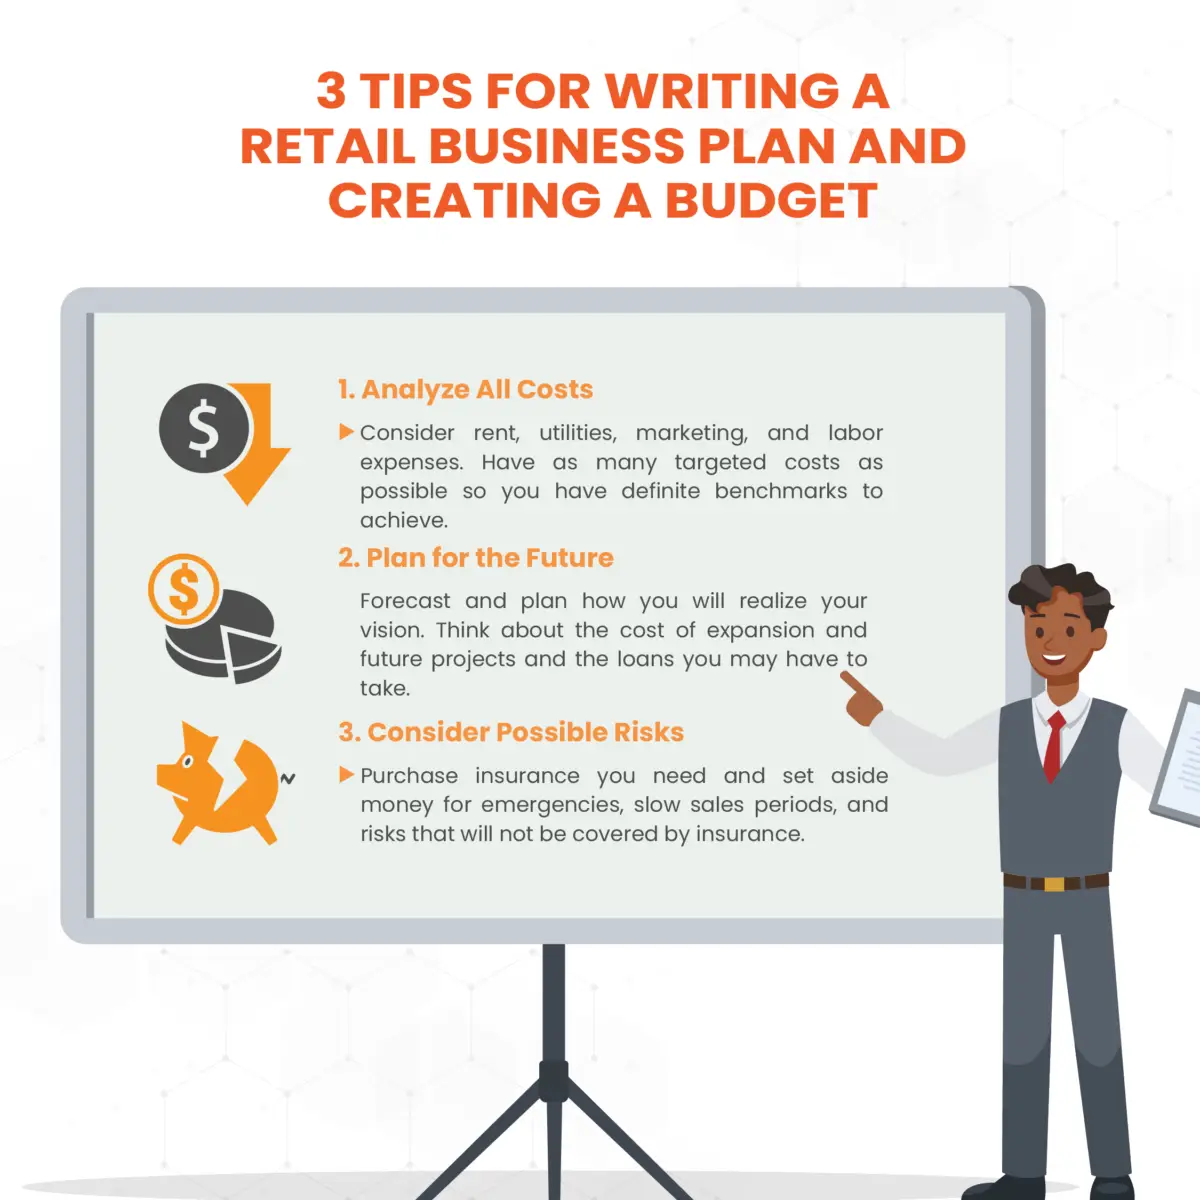 a graphic showing 3 tips for writing a retail business plan and creating a budget